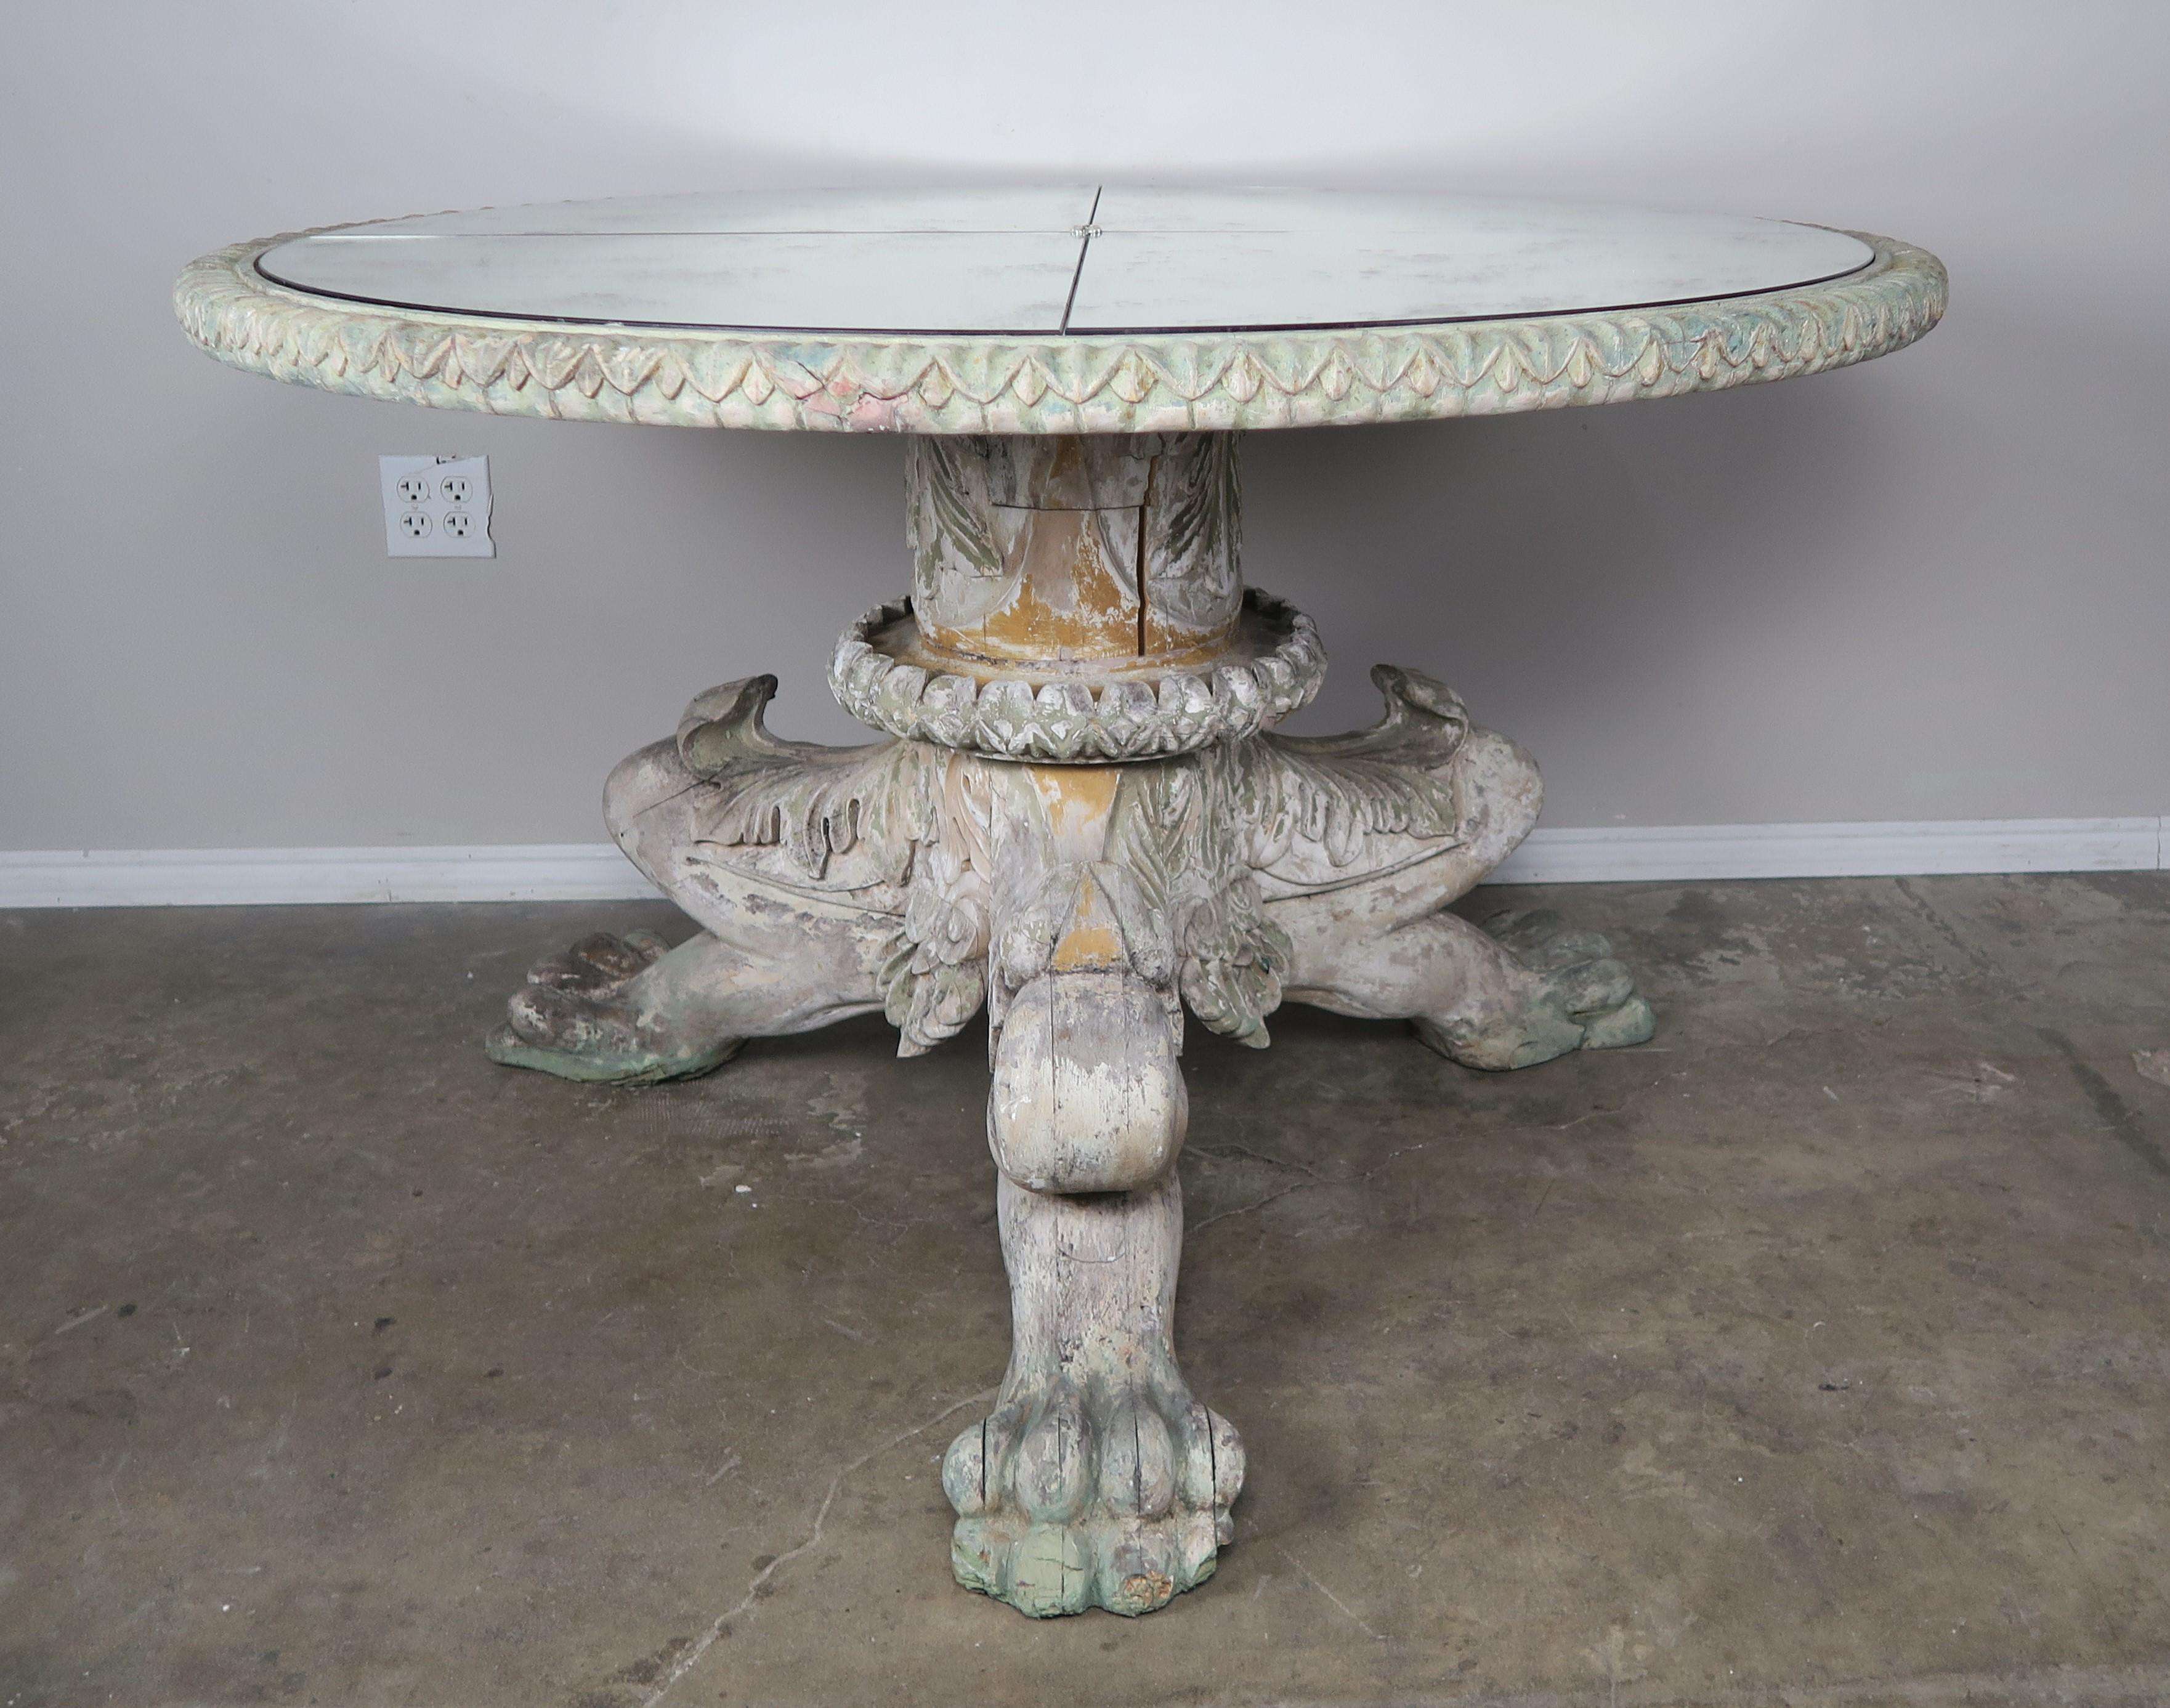 Italian style painted lion paw tripod table with antiqued mirror top. The mirror top is sectioned in four pieces that connect at a center crystal rosette. Worn distressed finish with remnants of paint throughout. Beautiful carved details of acanthus